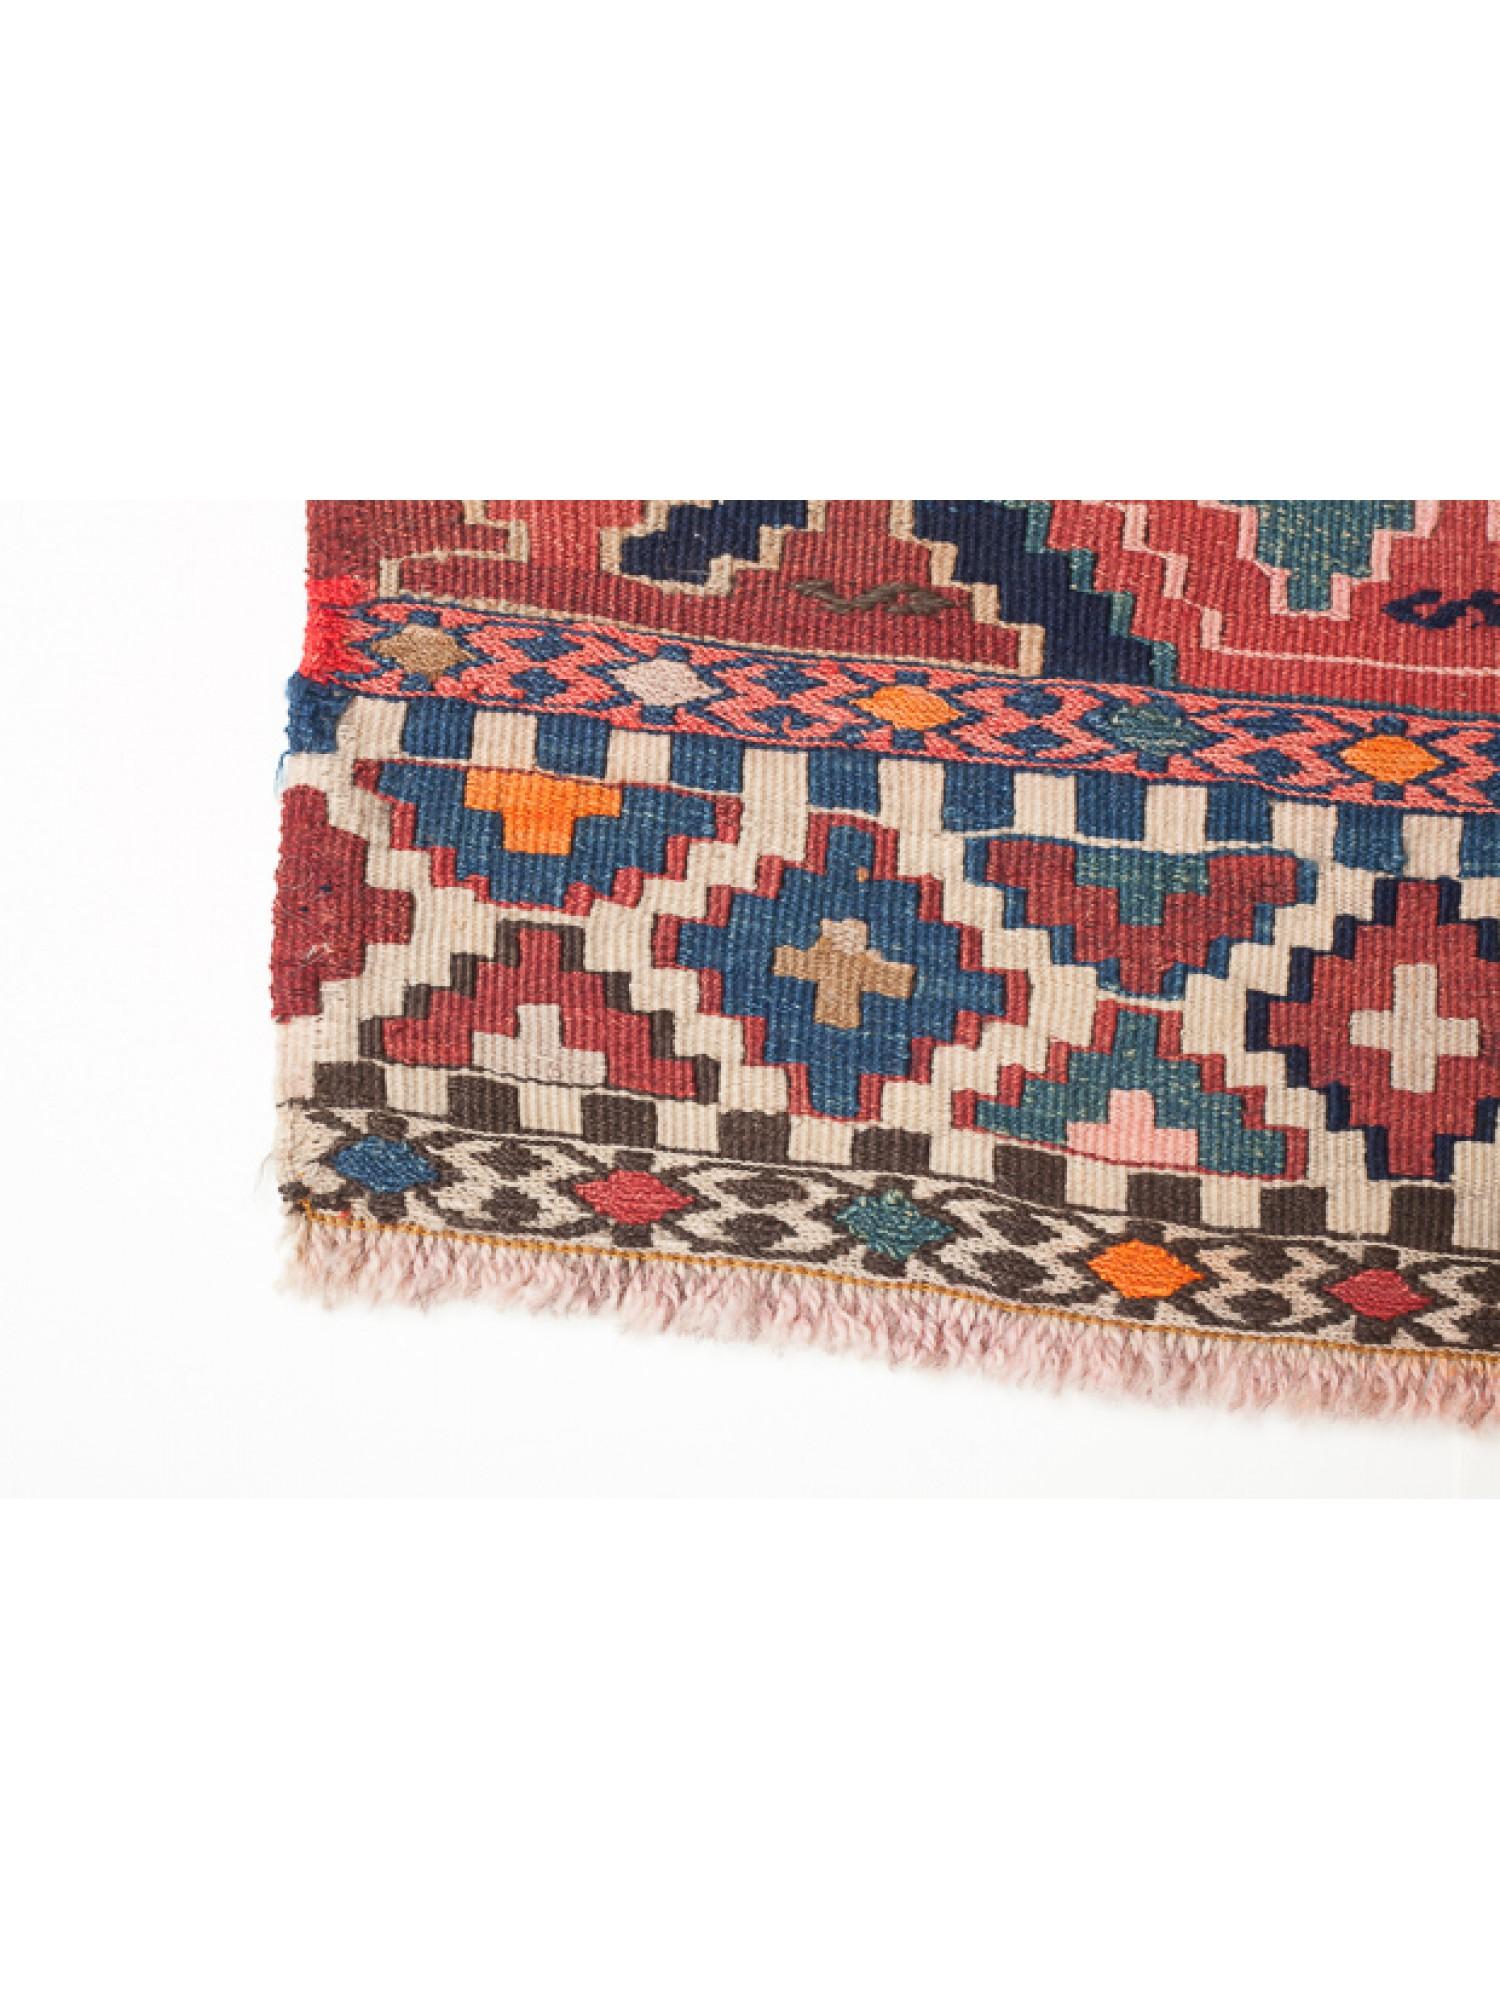 This is an antique collectible square Early 20th Century Kilim Woven Cradle Part from the Caucasus region with a rare and beautiful color composition.

Of the four countries that make up the Caucasus, Azerbaijan produces the most kilims, and the